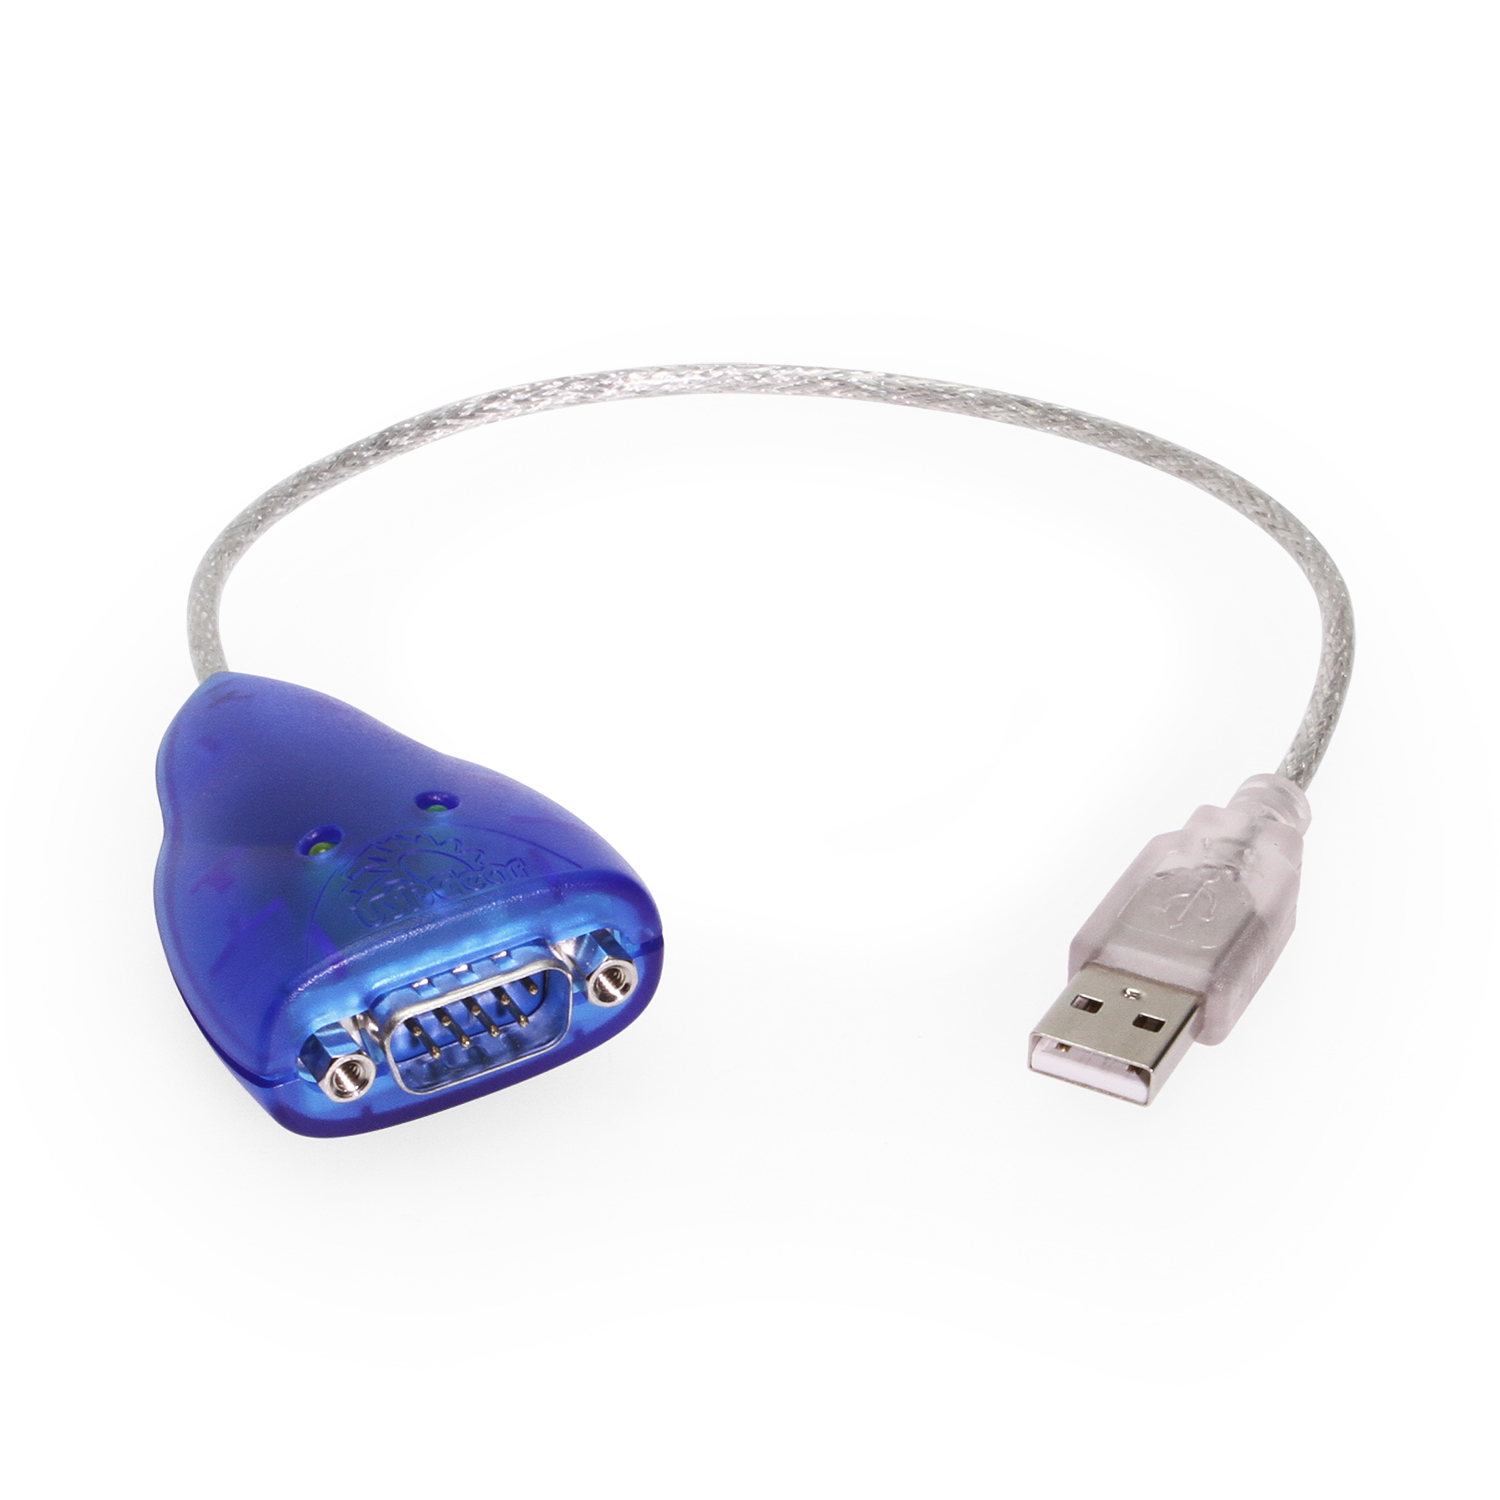 USB to Serial RS-232 DB9 Adapter Chipset w/ 15kV ESD Protection, Windows 11 Support - Coolgear